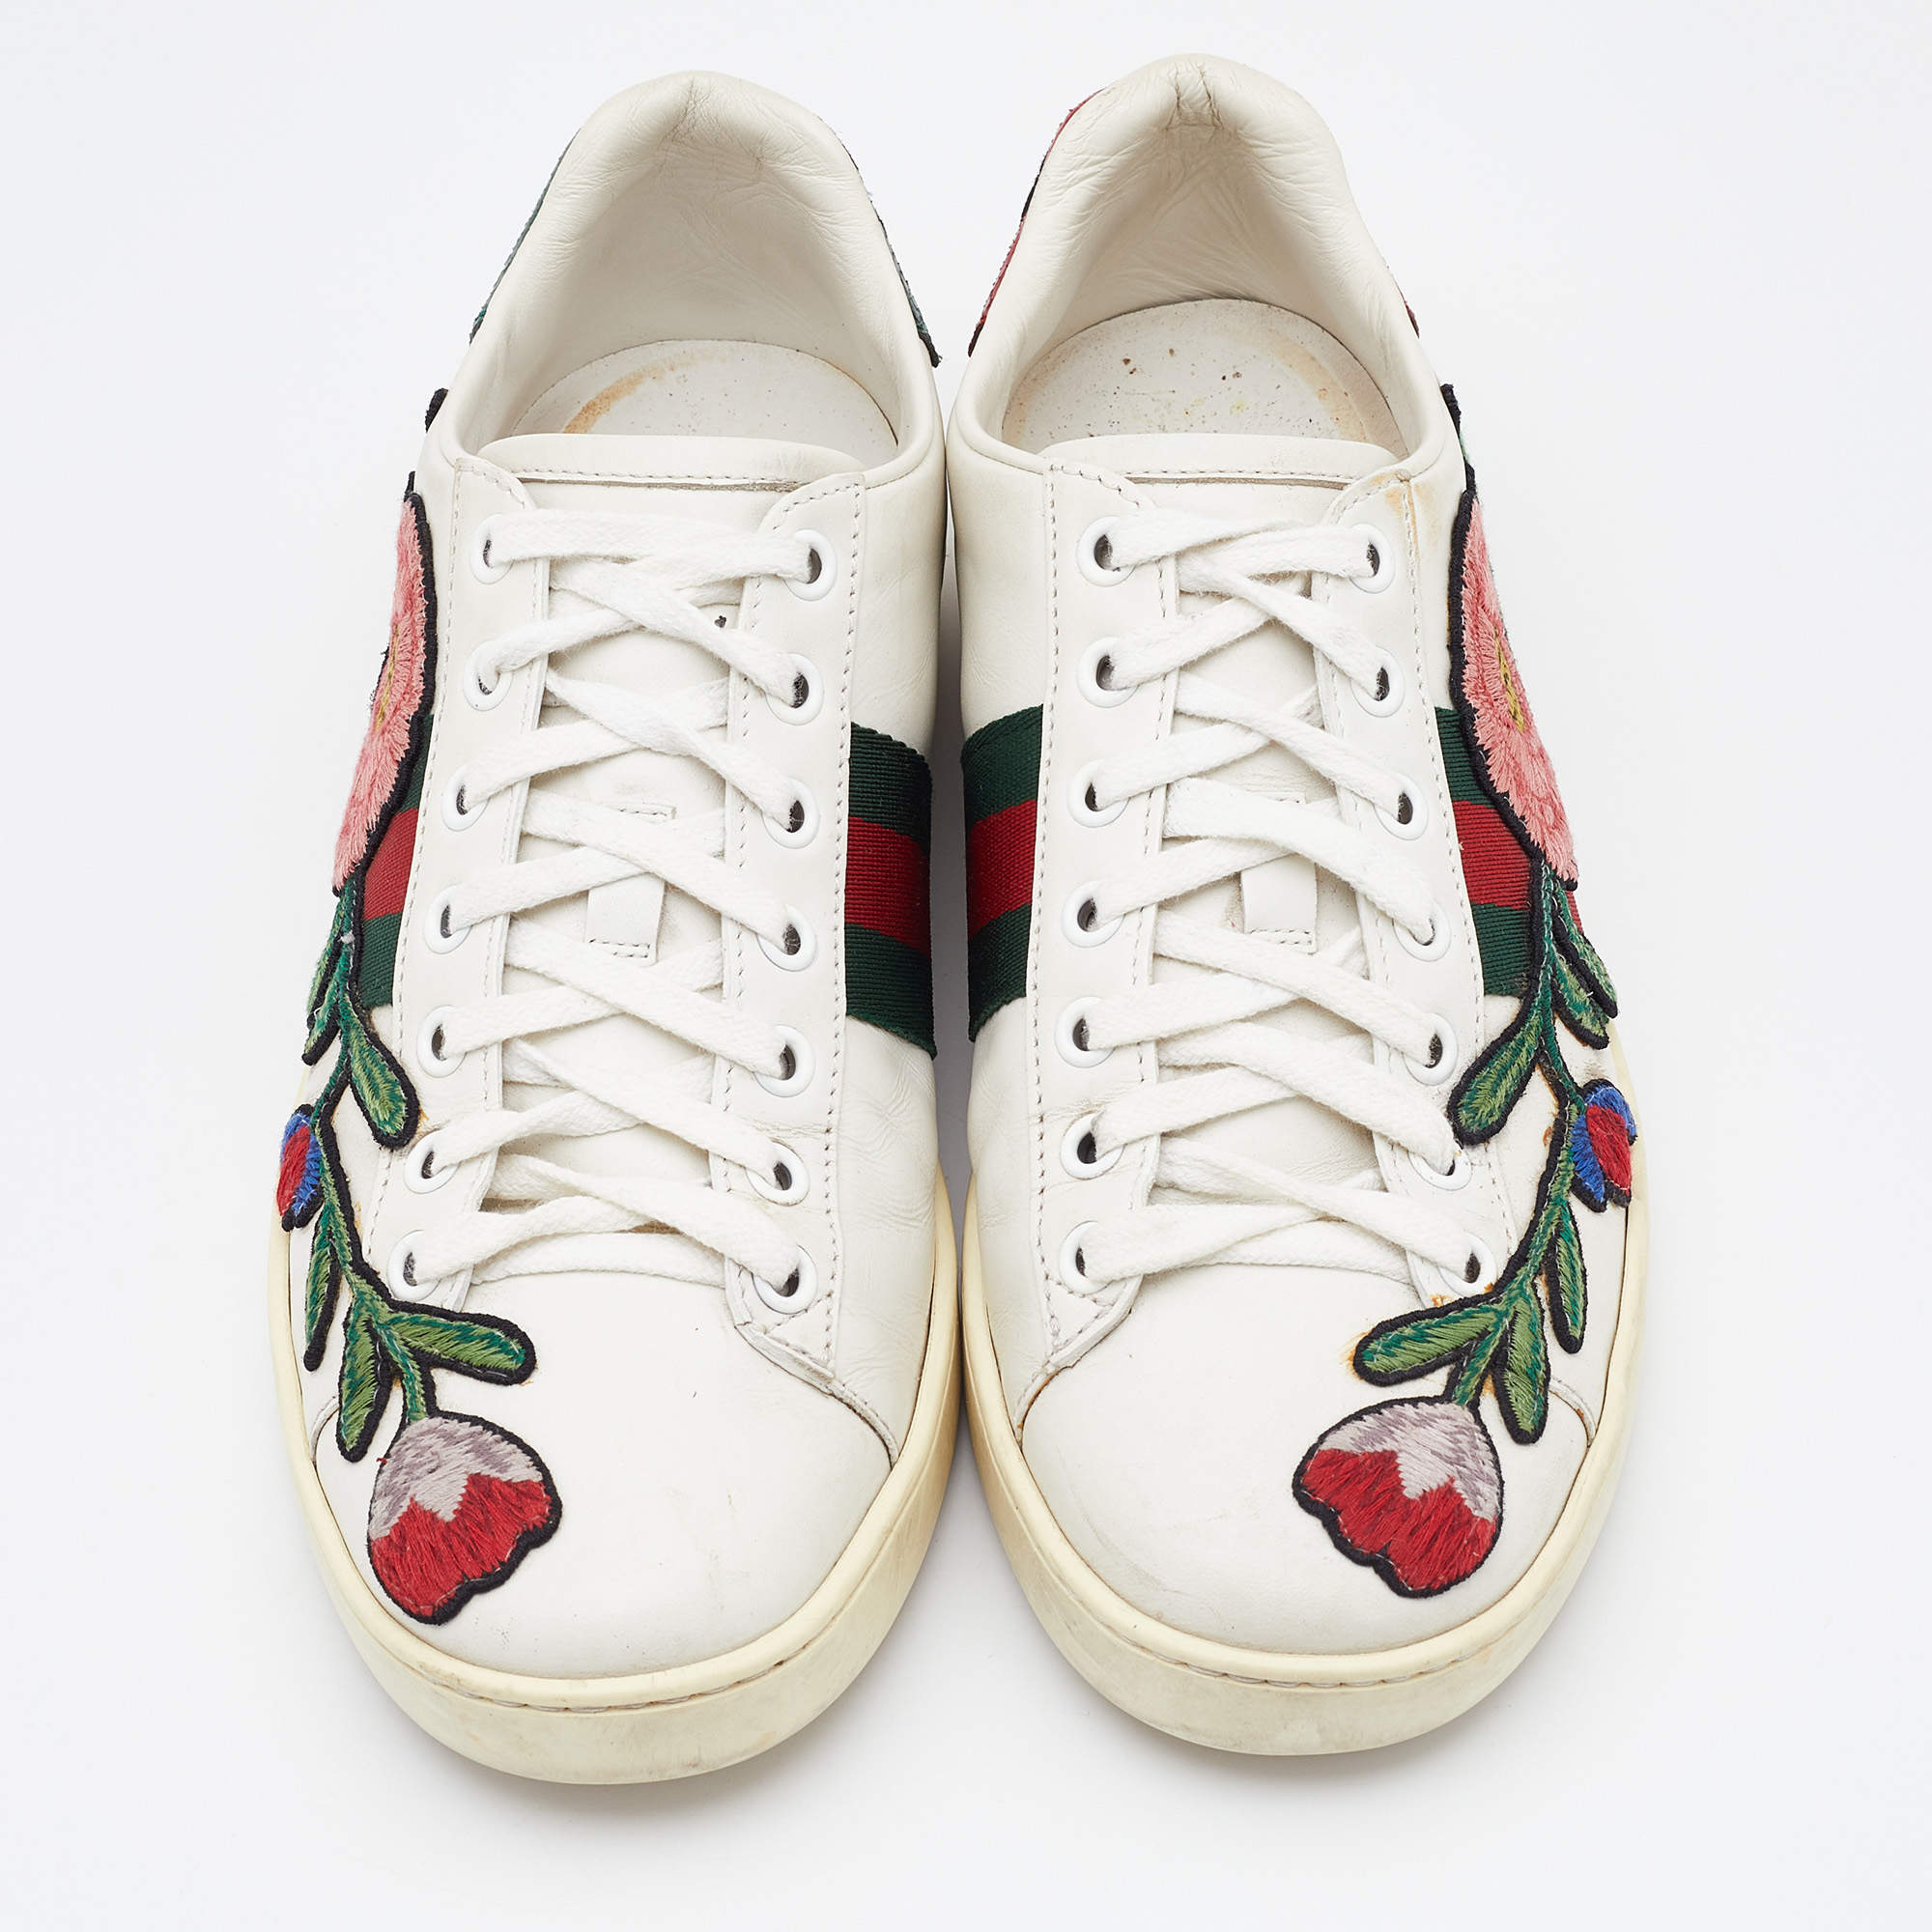 GUCCI Sneakers ACE Web Floral Embroidered White Leather 36 US 6 Women's $795